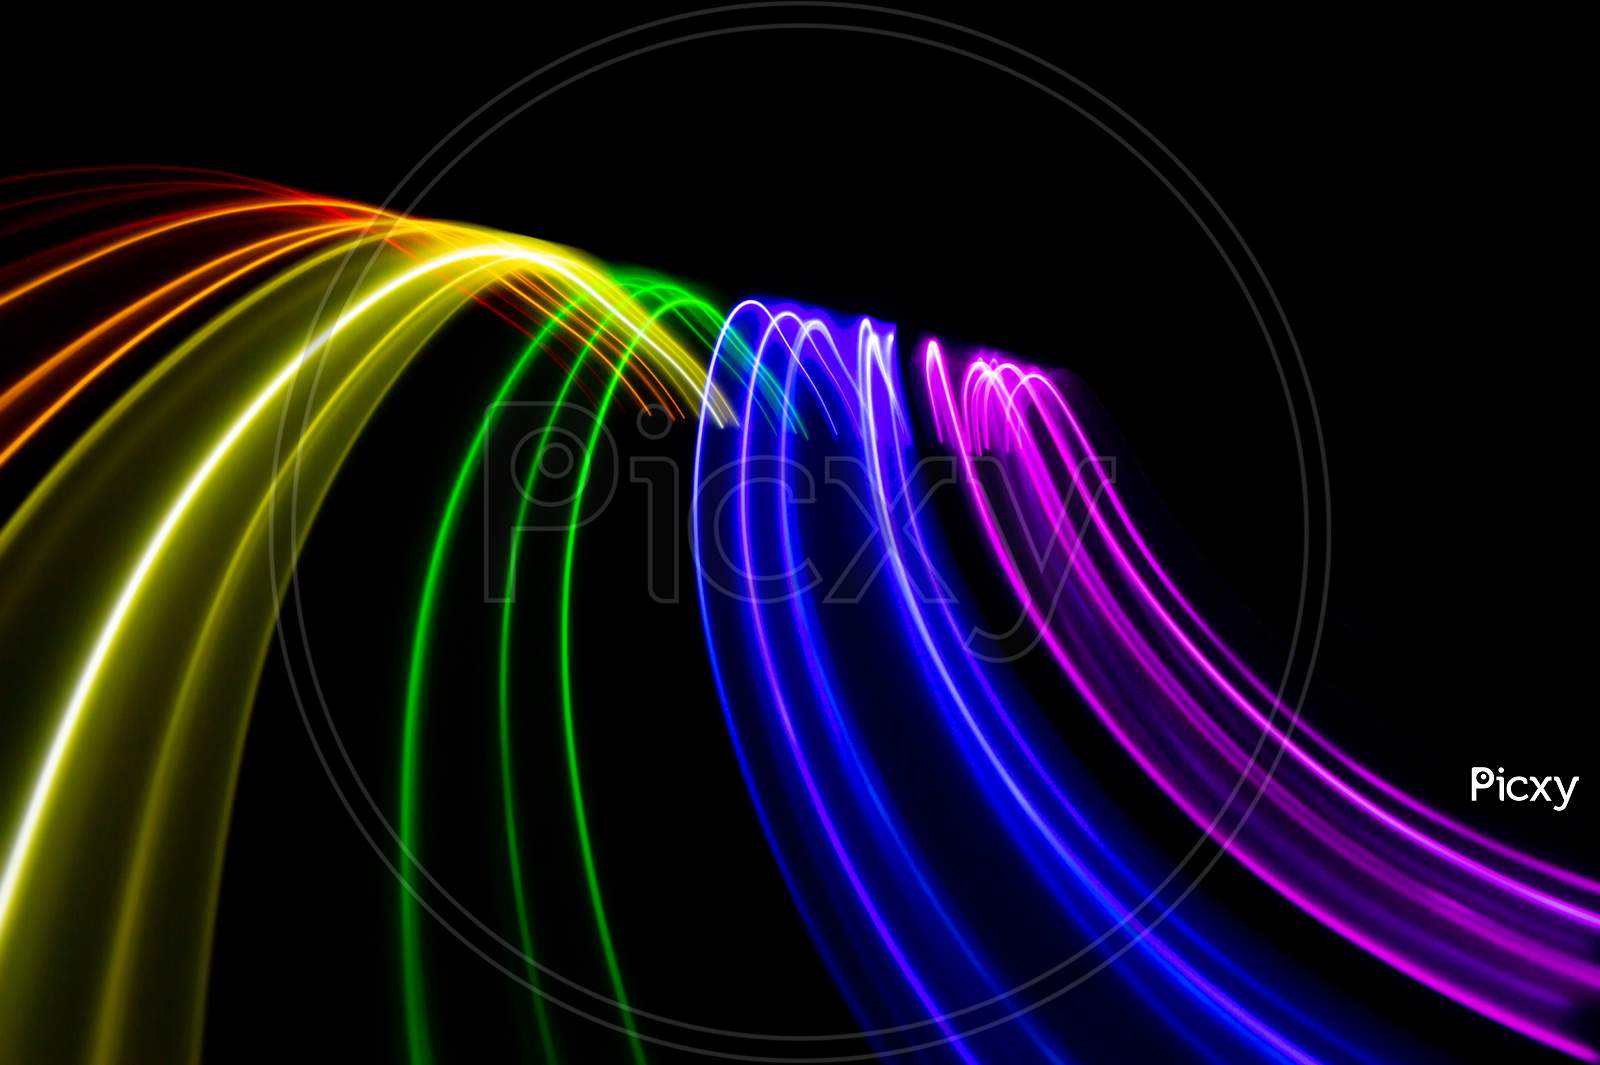 Abstract Lights Pattern With Rainbow Colors. Sore Curved Lines. Equal Rights Symbol With The Colors Of The Lgbt Community